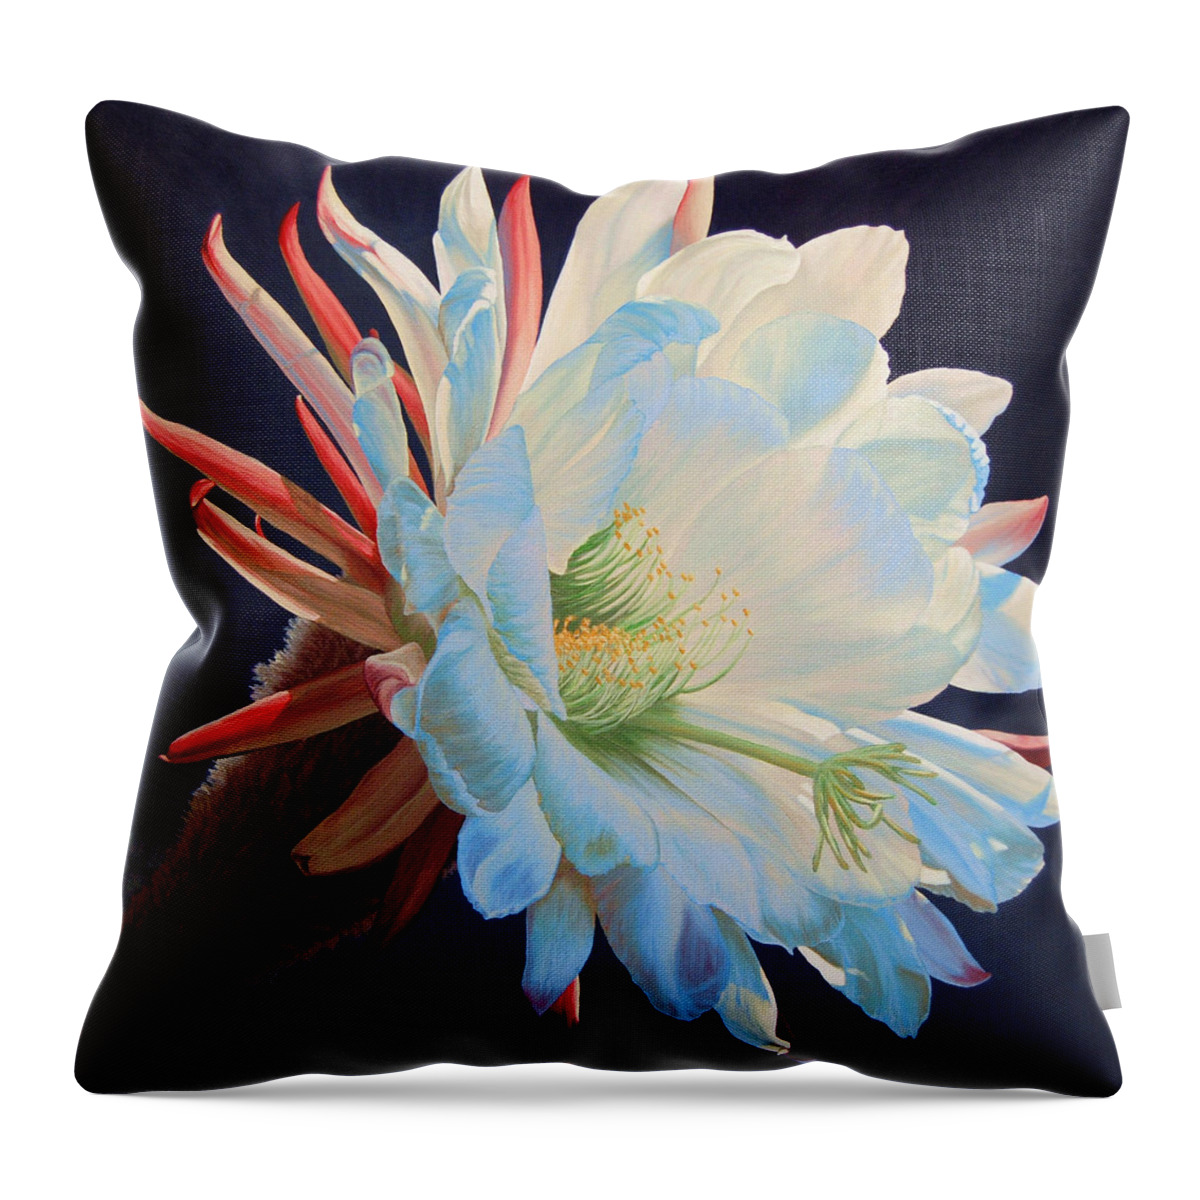 Flower Throw Pillow featuring the painting Daybreak Delight by Cheryl Fecht